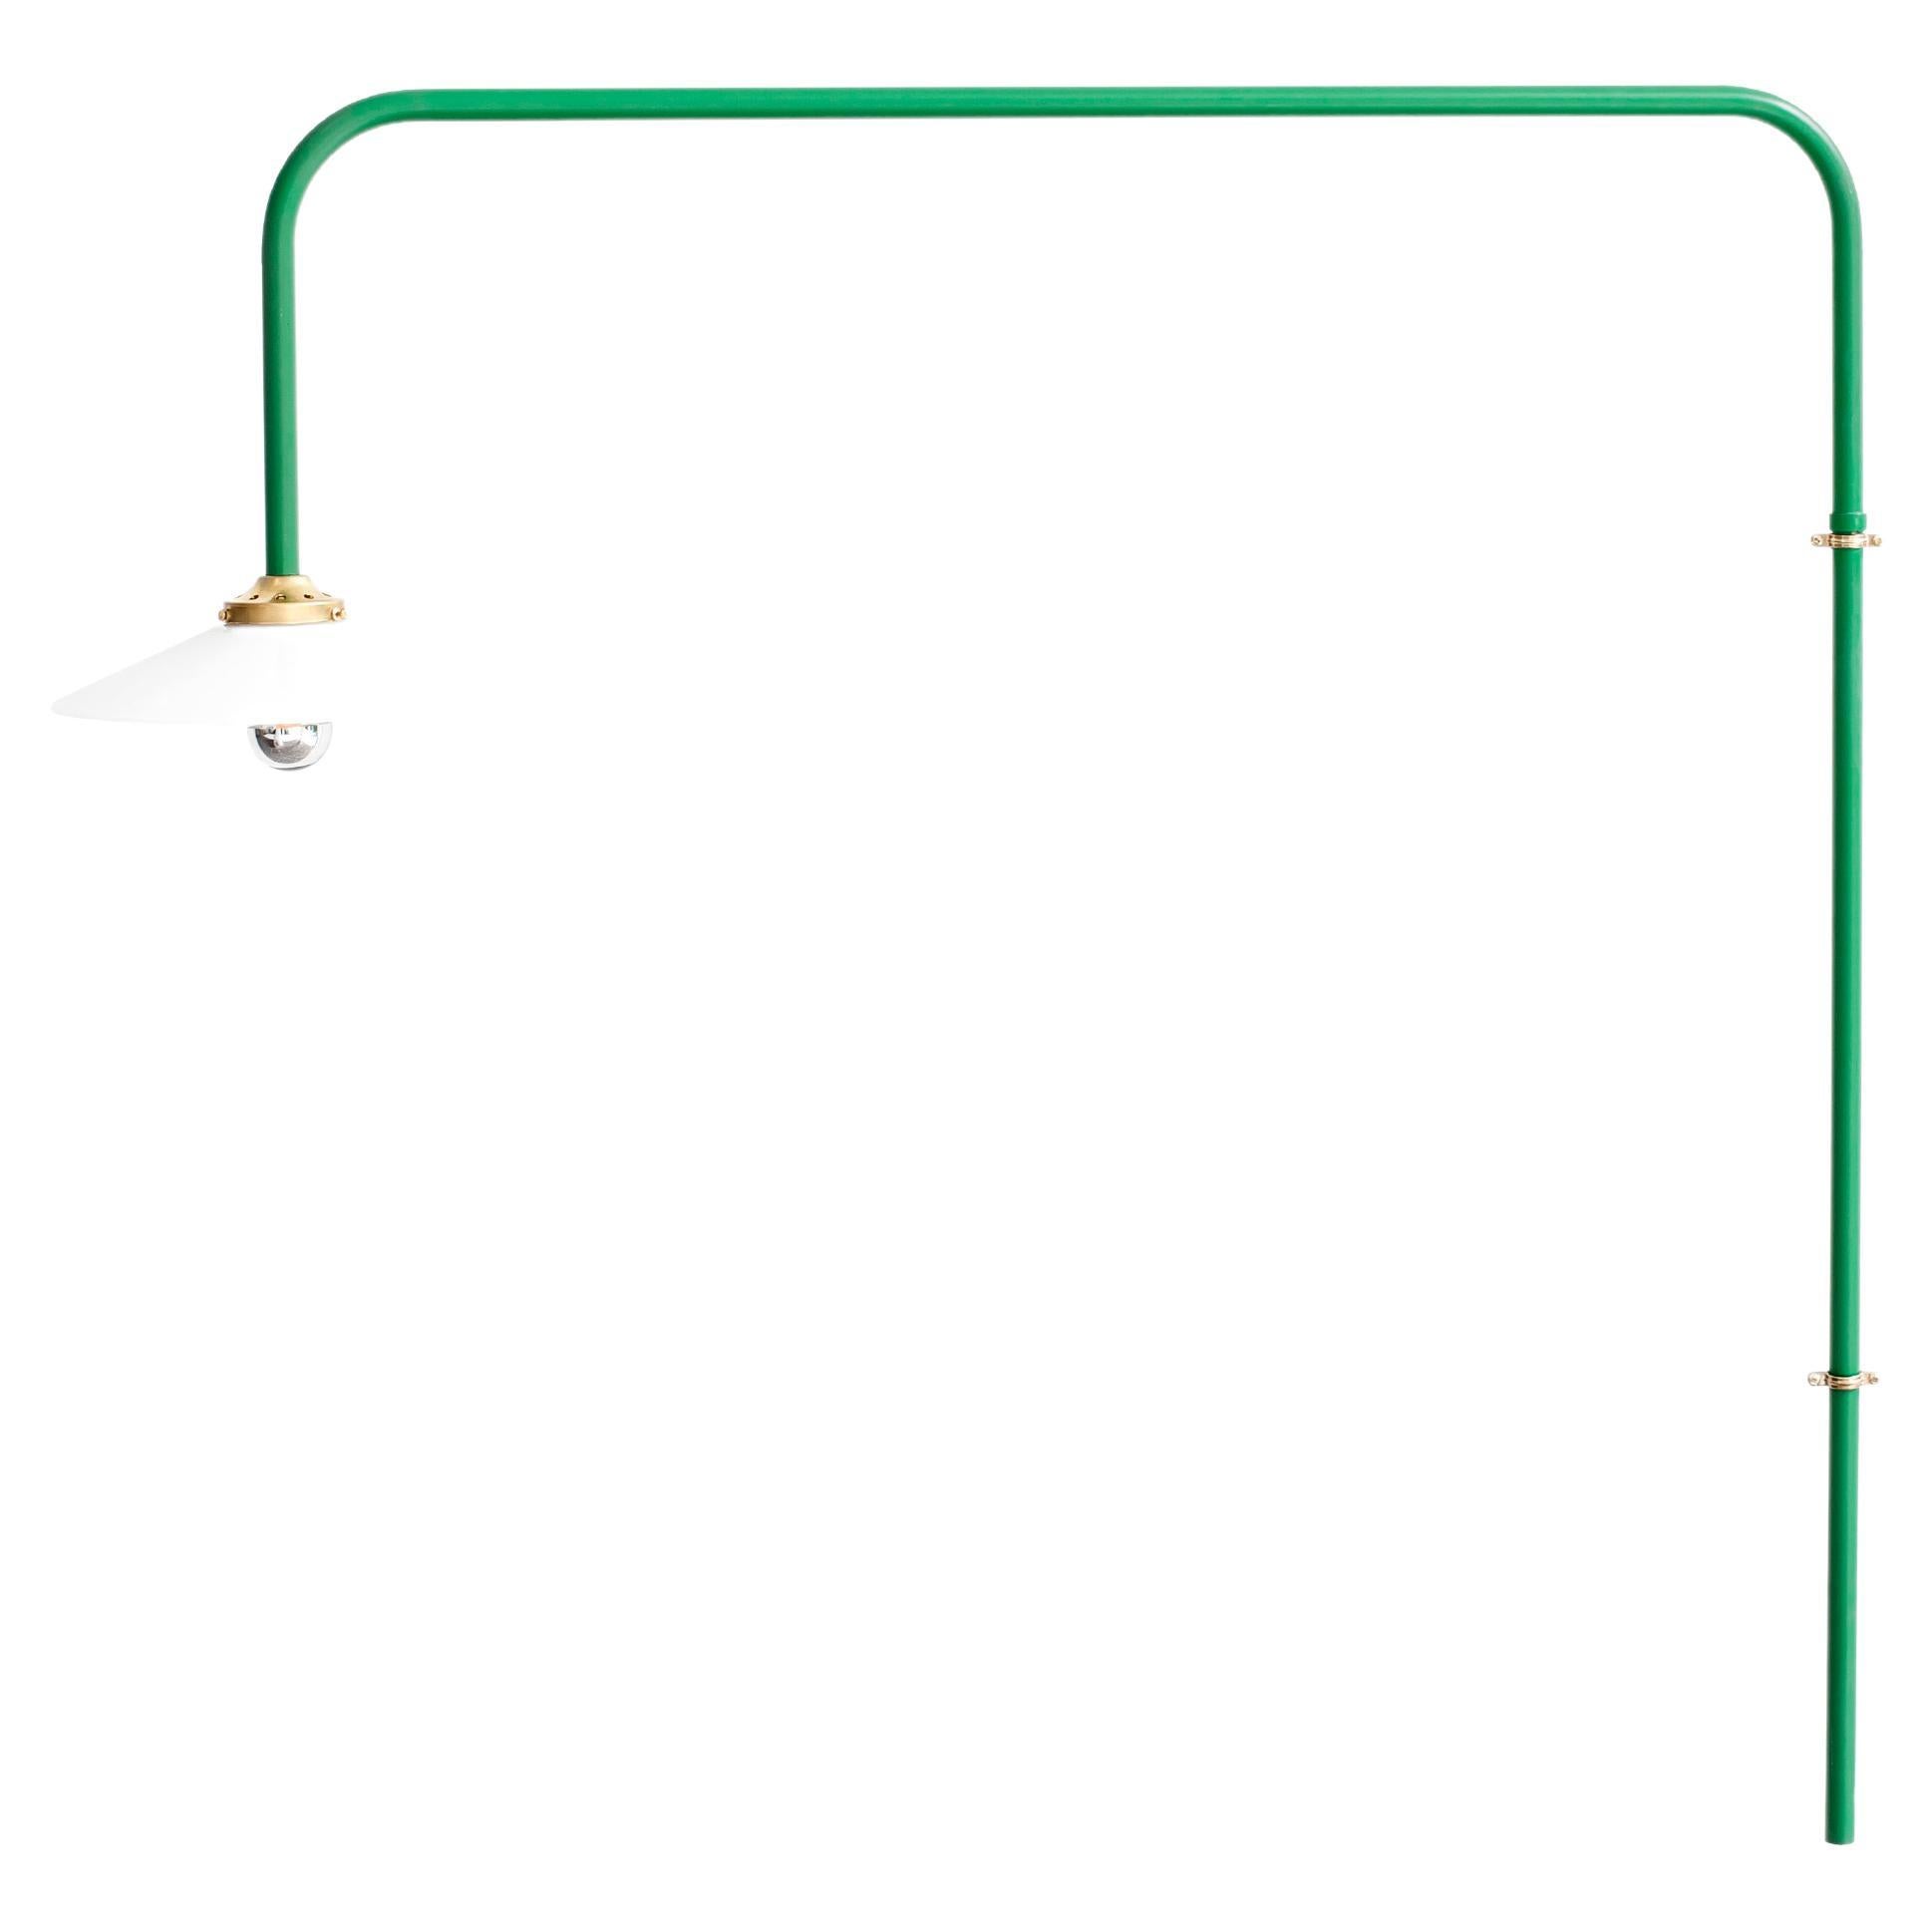 Contemporary Hanging Lamp N°5 by Muller Van Severen x Valerie Objects, Green For Sale